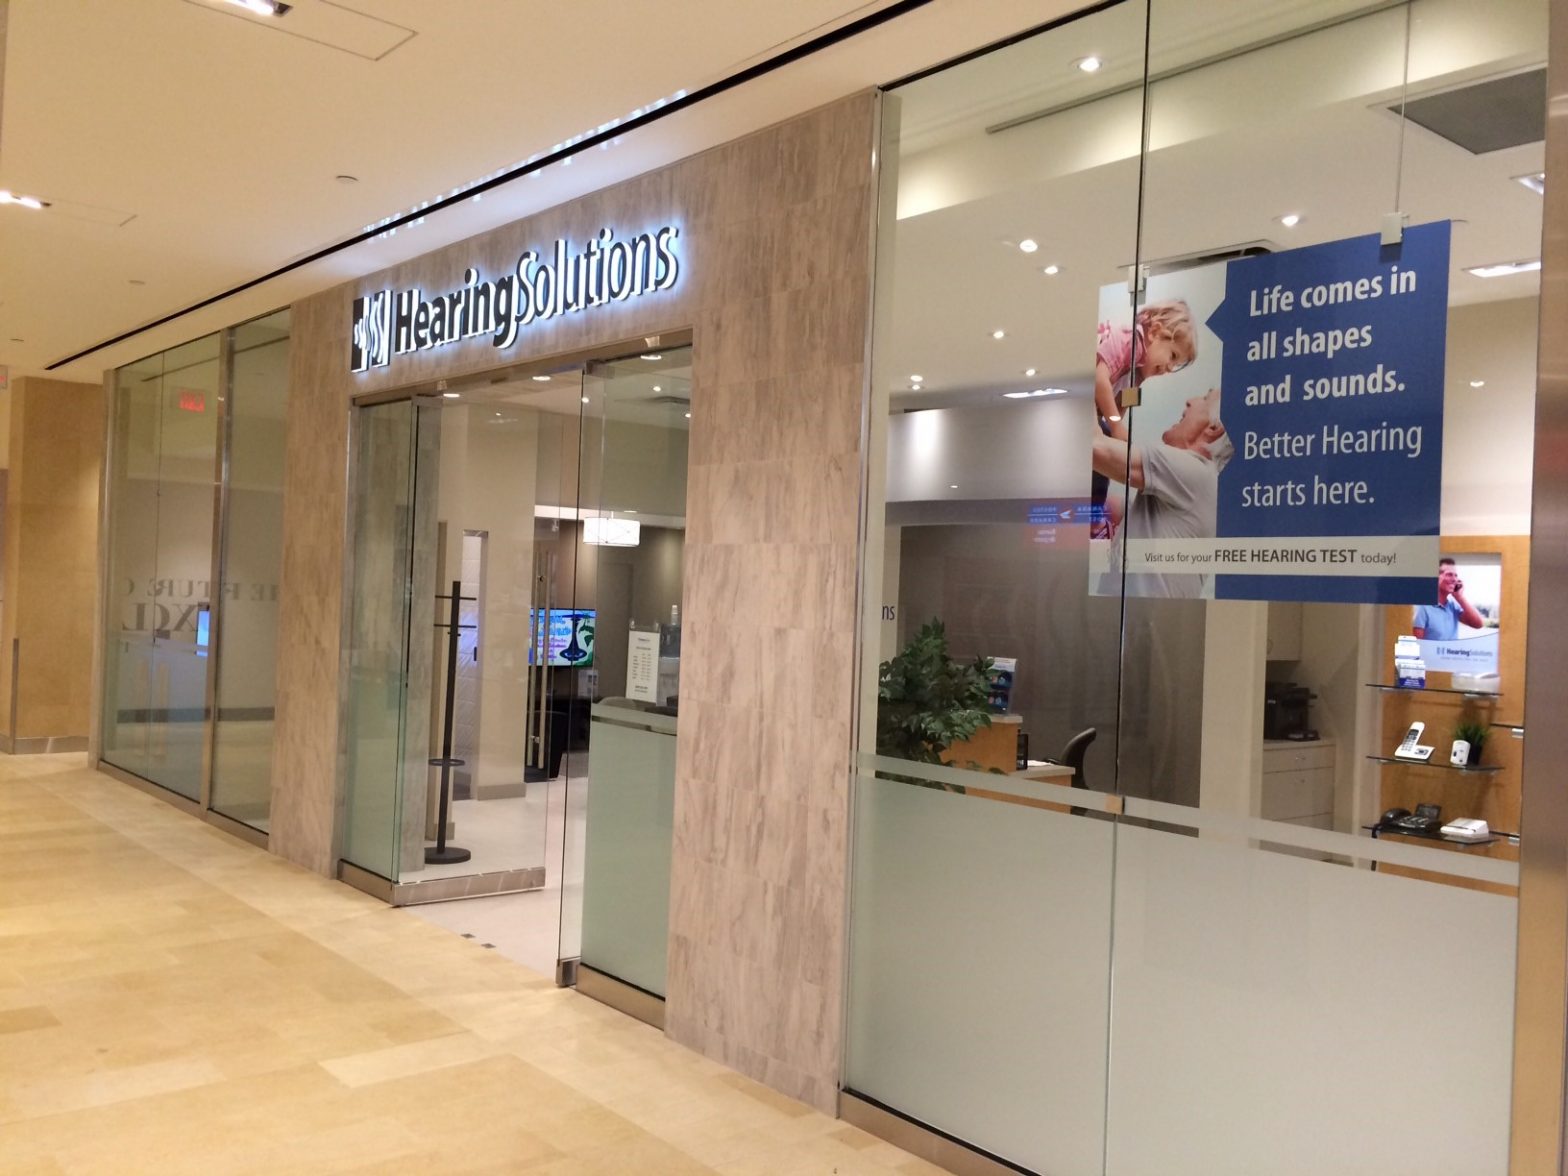 Hearing Solutions Square One Clinic is NOW OPEN!